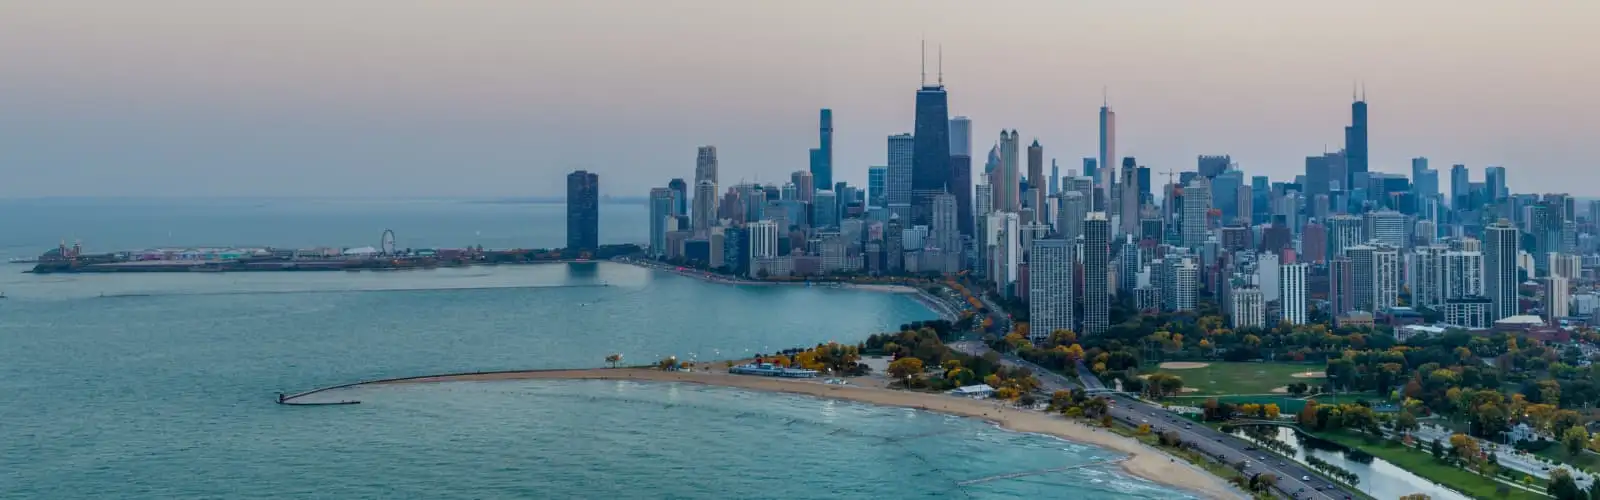 Aerial view of Chicago downtown skyline with park and the beach. Find Illinois insurance.